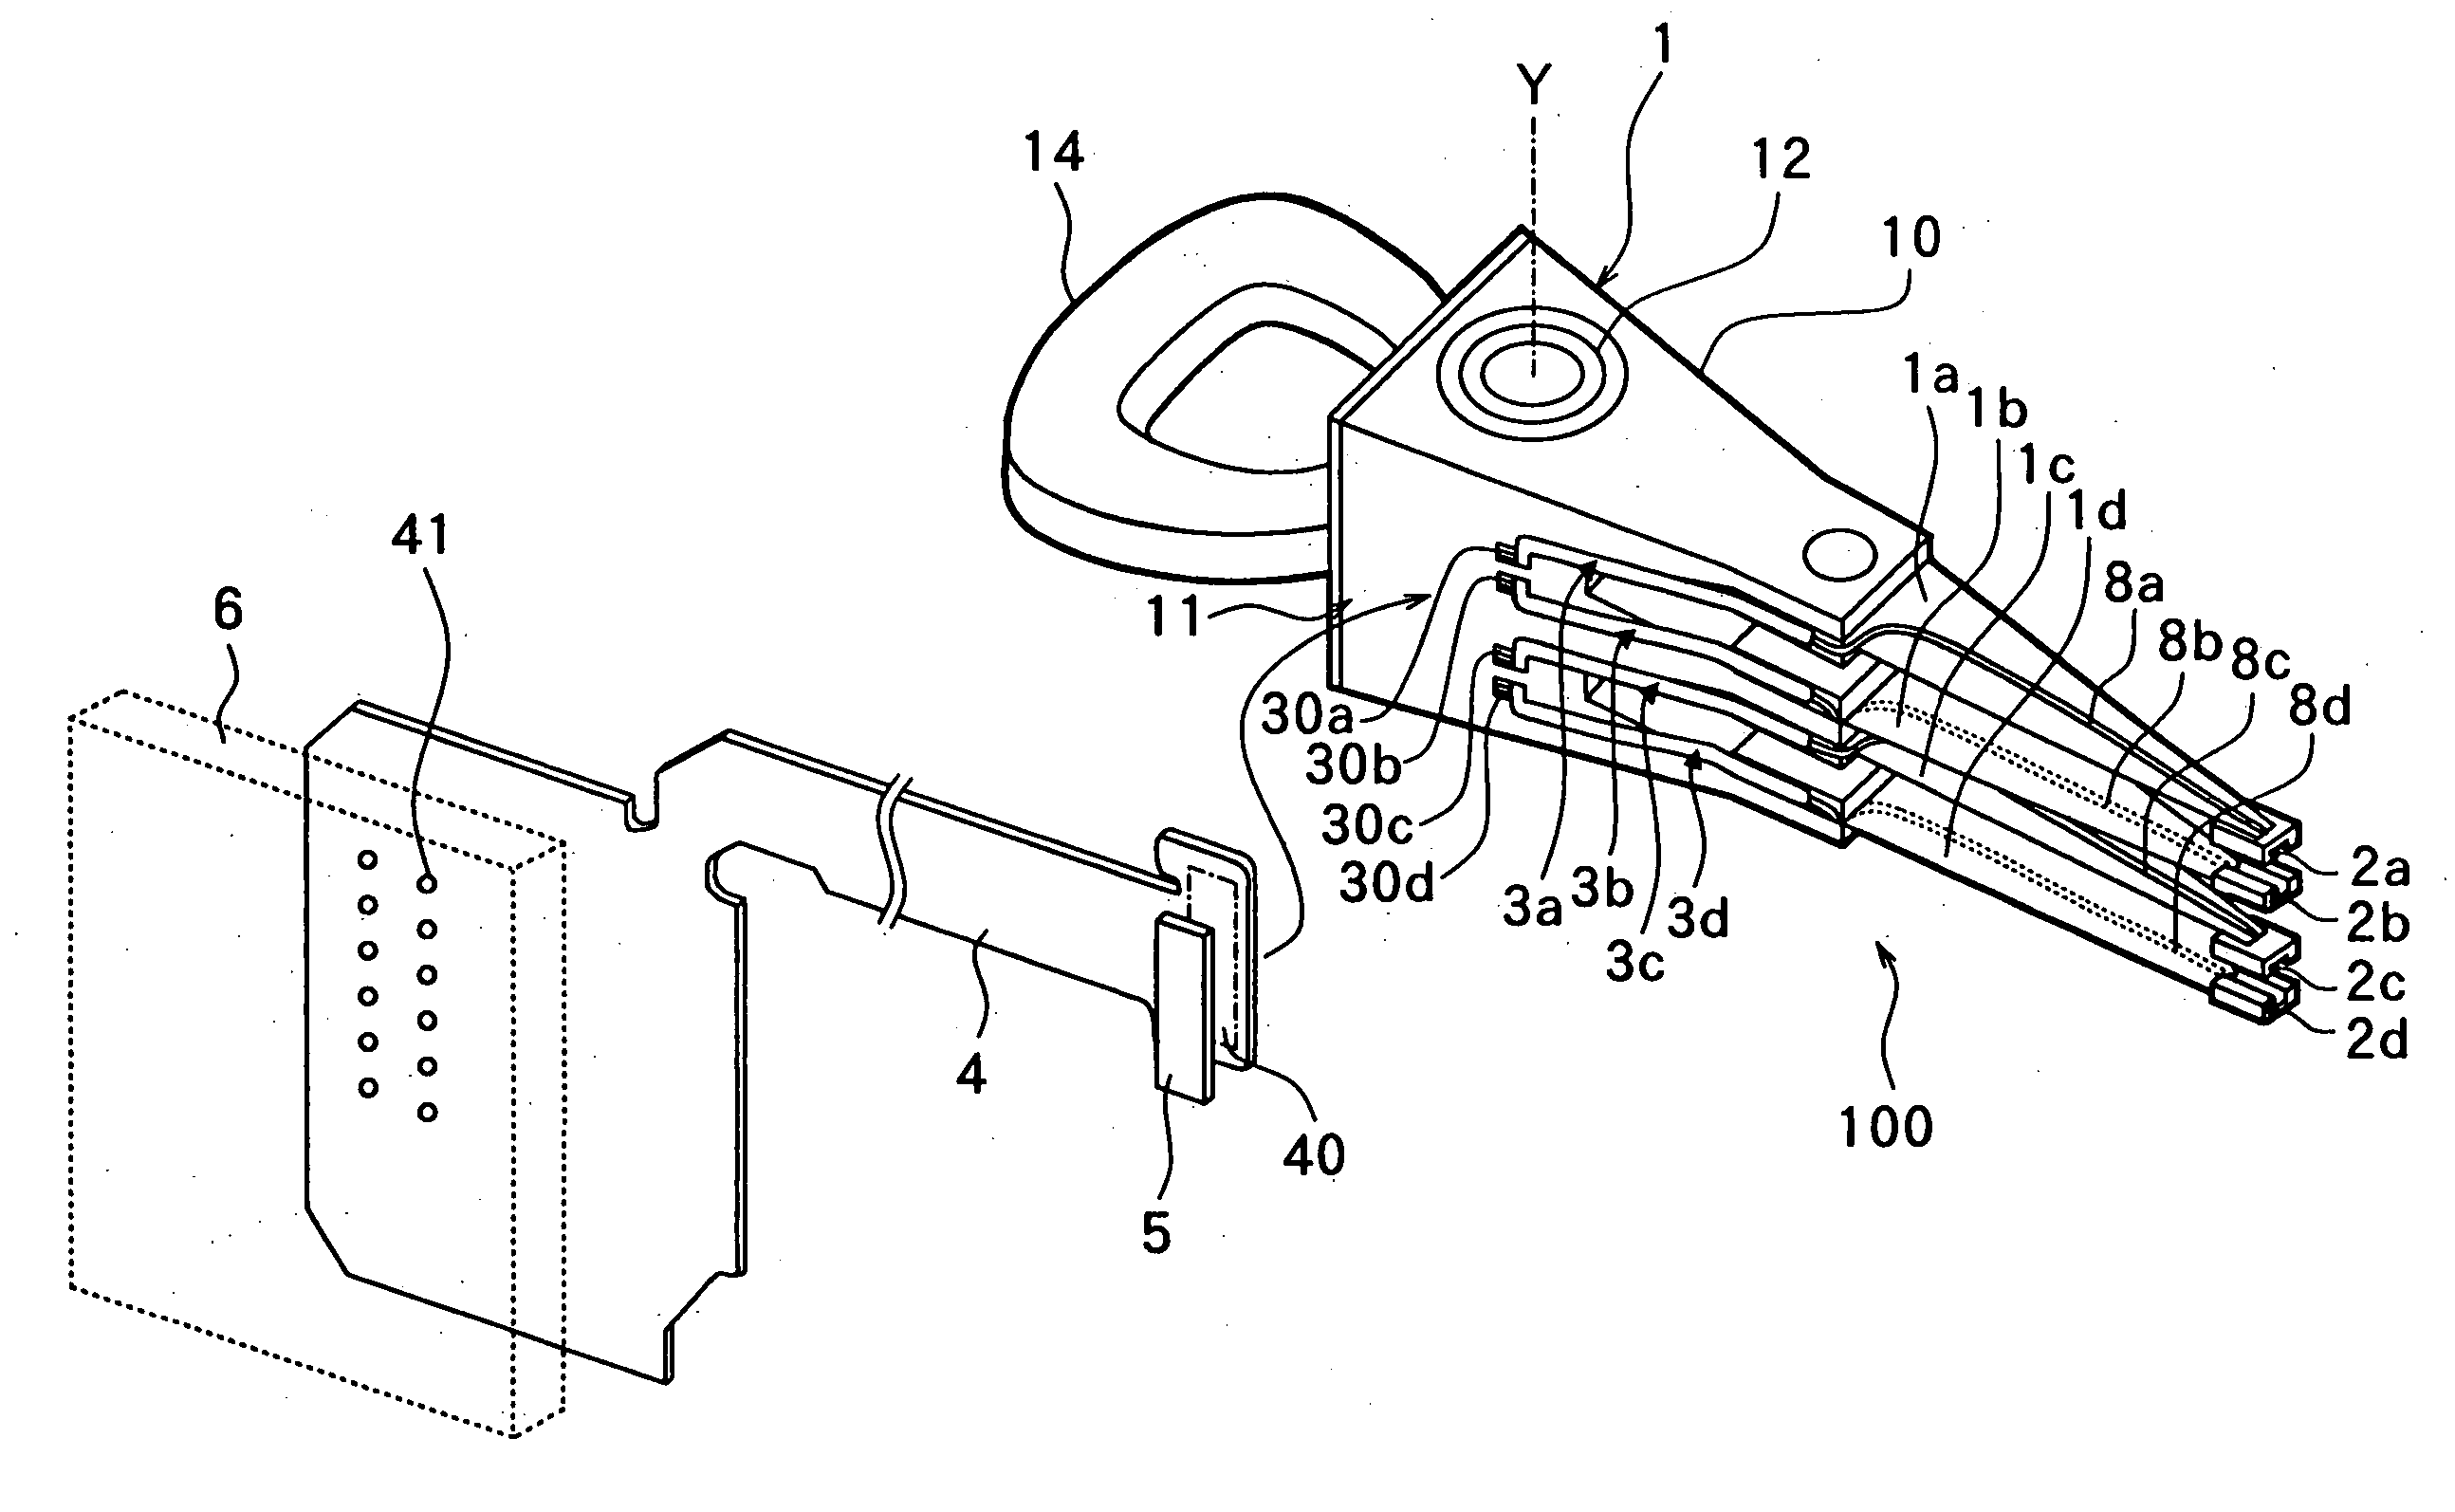 Magnetic head assembly having a rotational arm for electrically connecting the magnetic head to an external circuit and methods of manufacturing the same